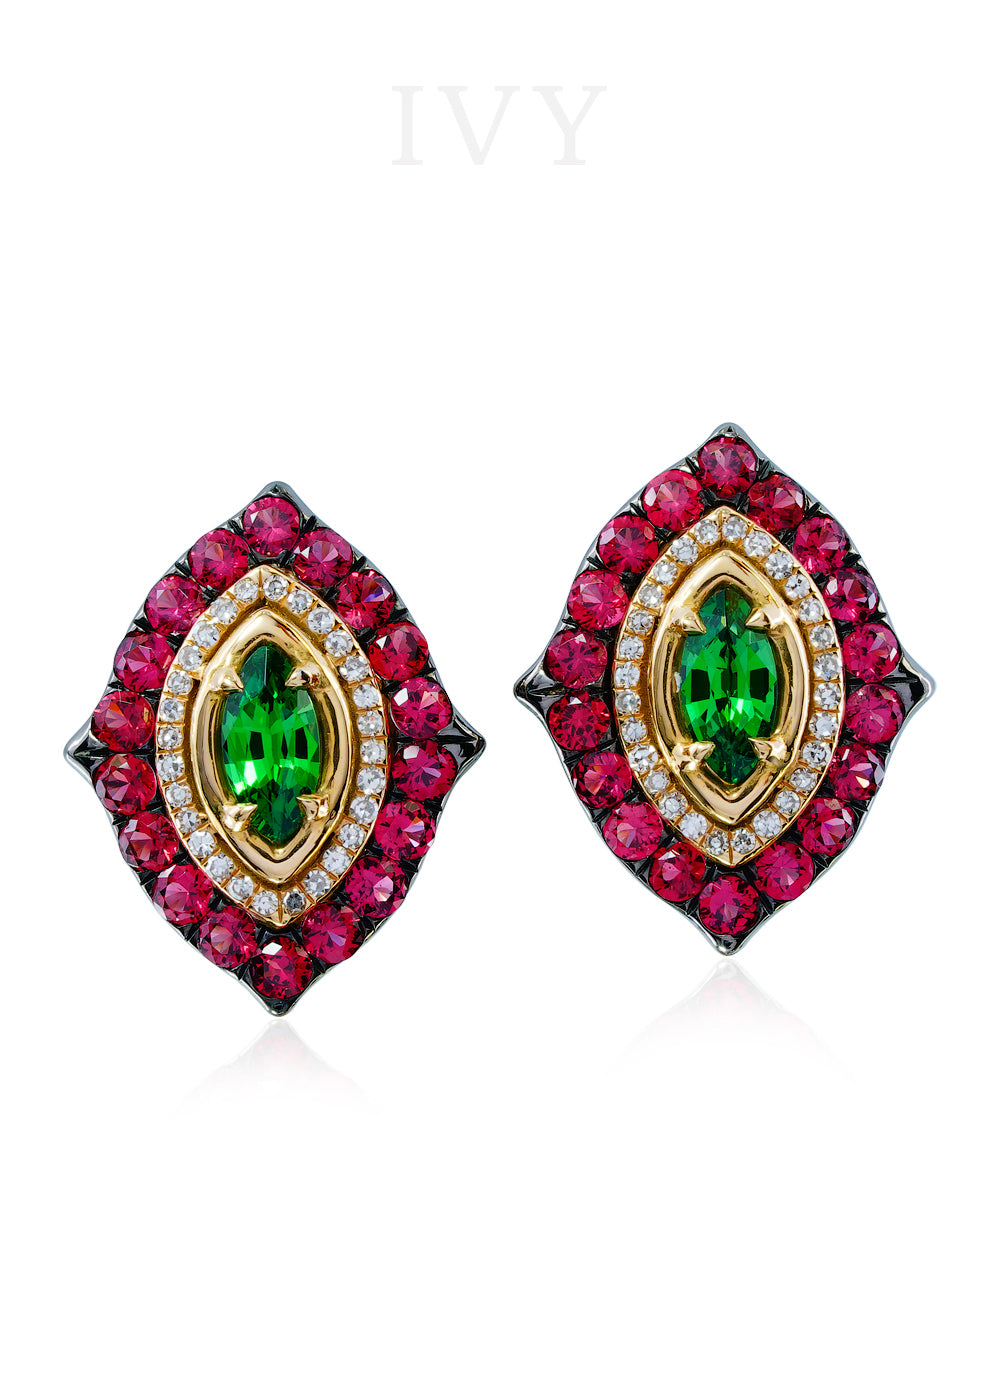 La Marchesa Earrings with Tsavorites and Red Spinel